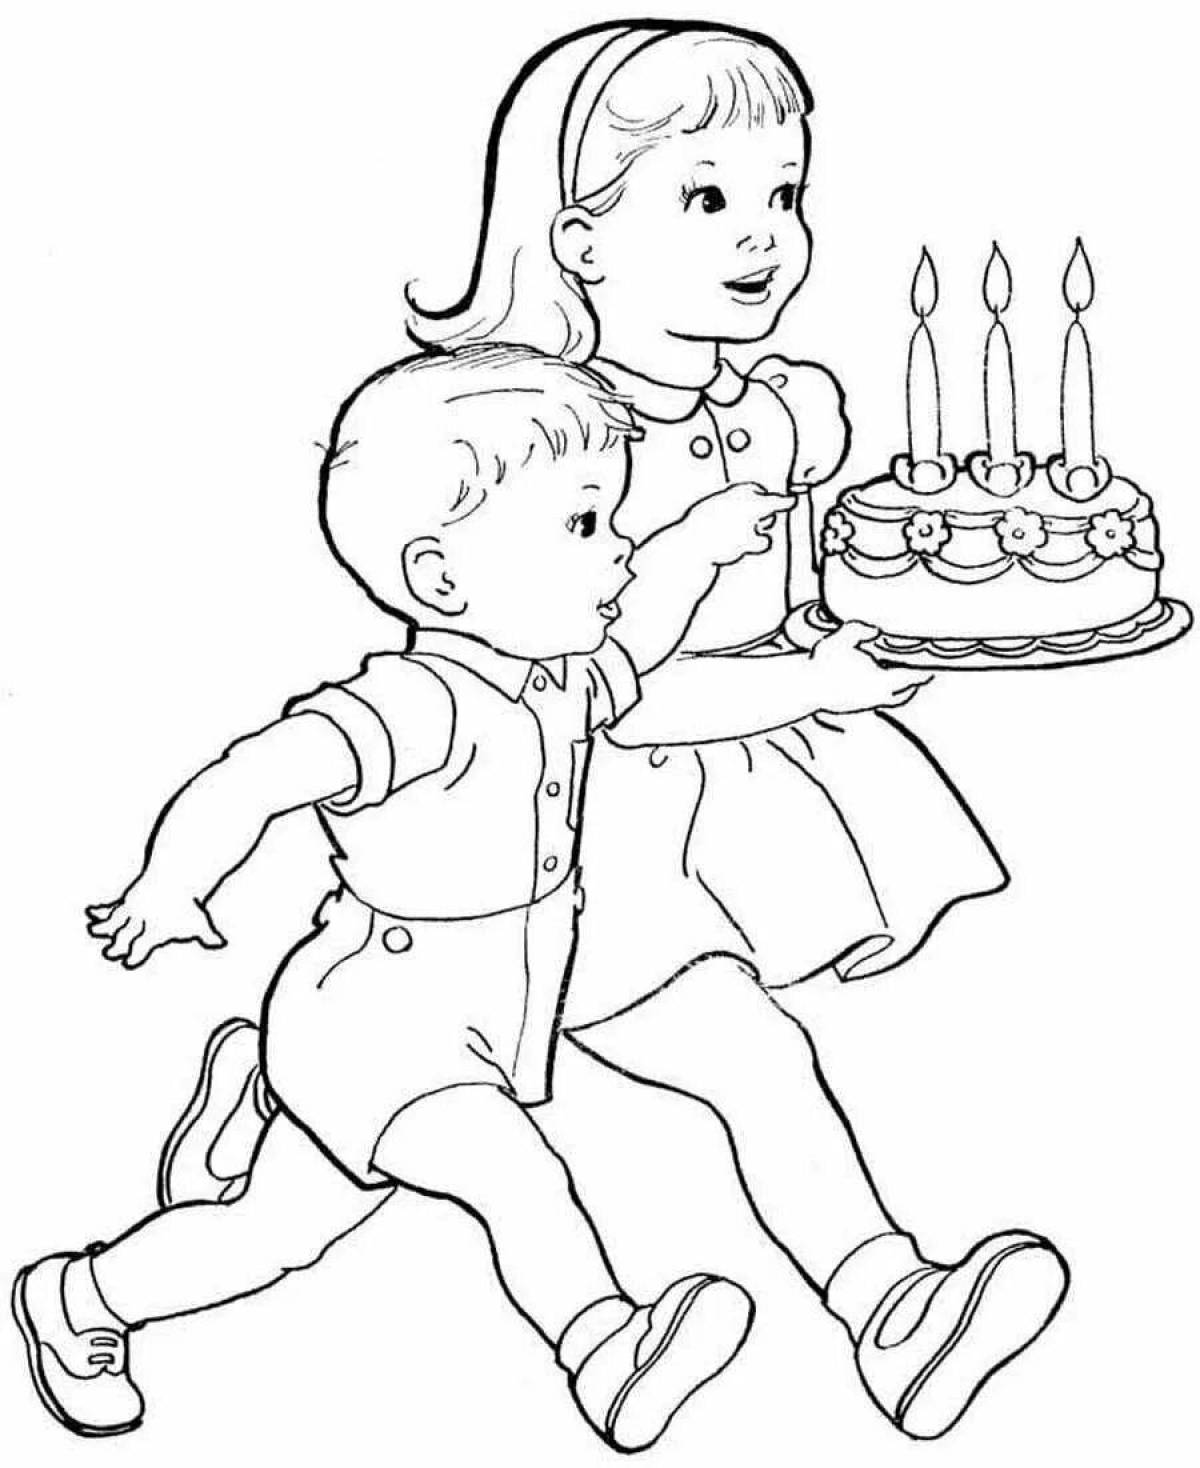 Exquisite happy birthday dad coloring book for kids